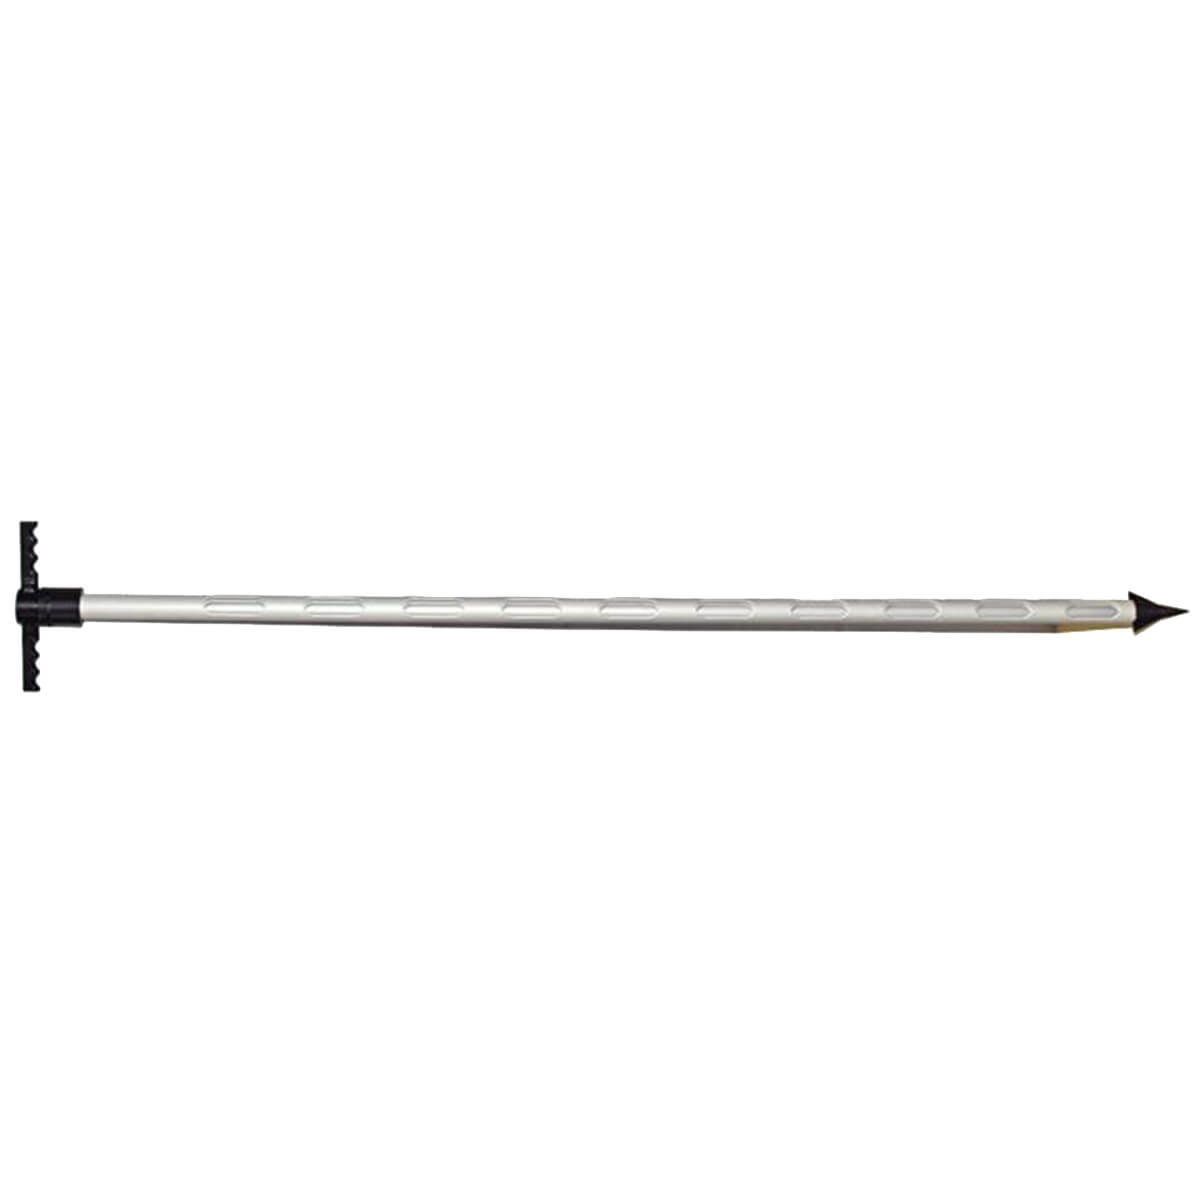 Aluminum Sampler Probe with T-Handle - 6-ft